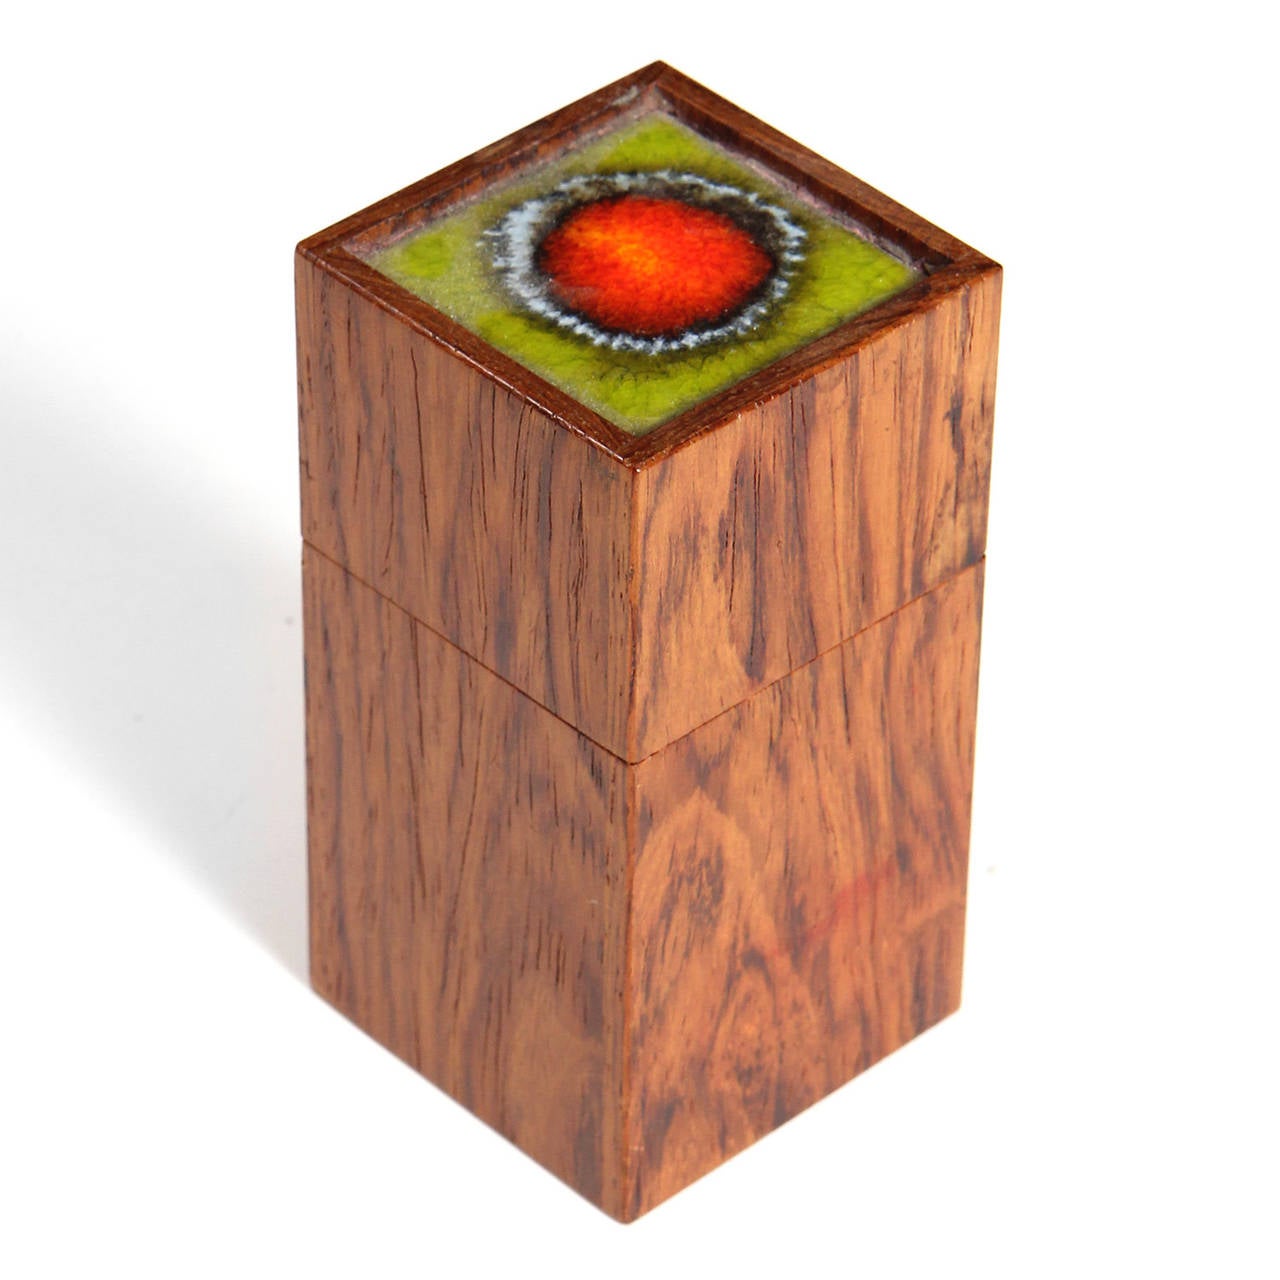 A masterfully crafted rosewood trinket box with a colorful green and red ceramic tile inset in the lid.